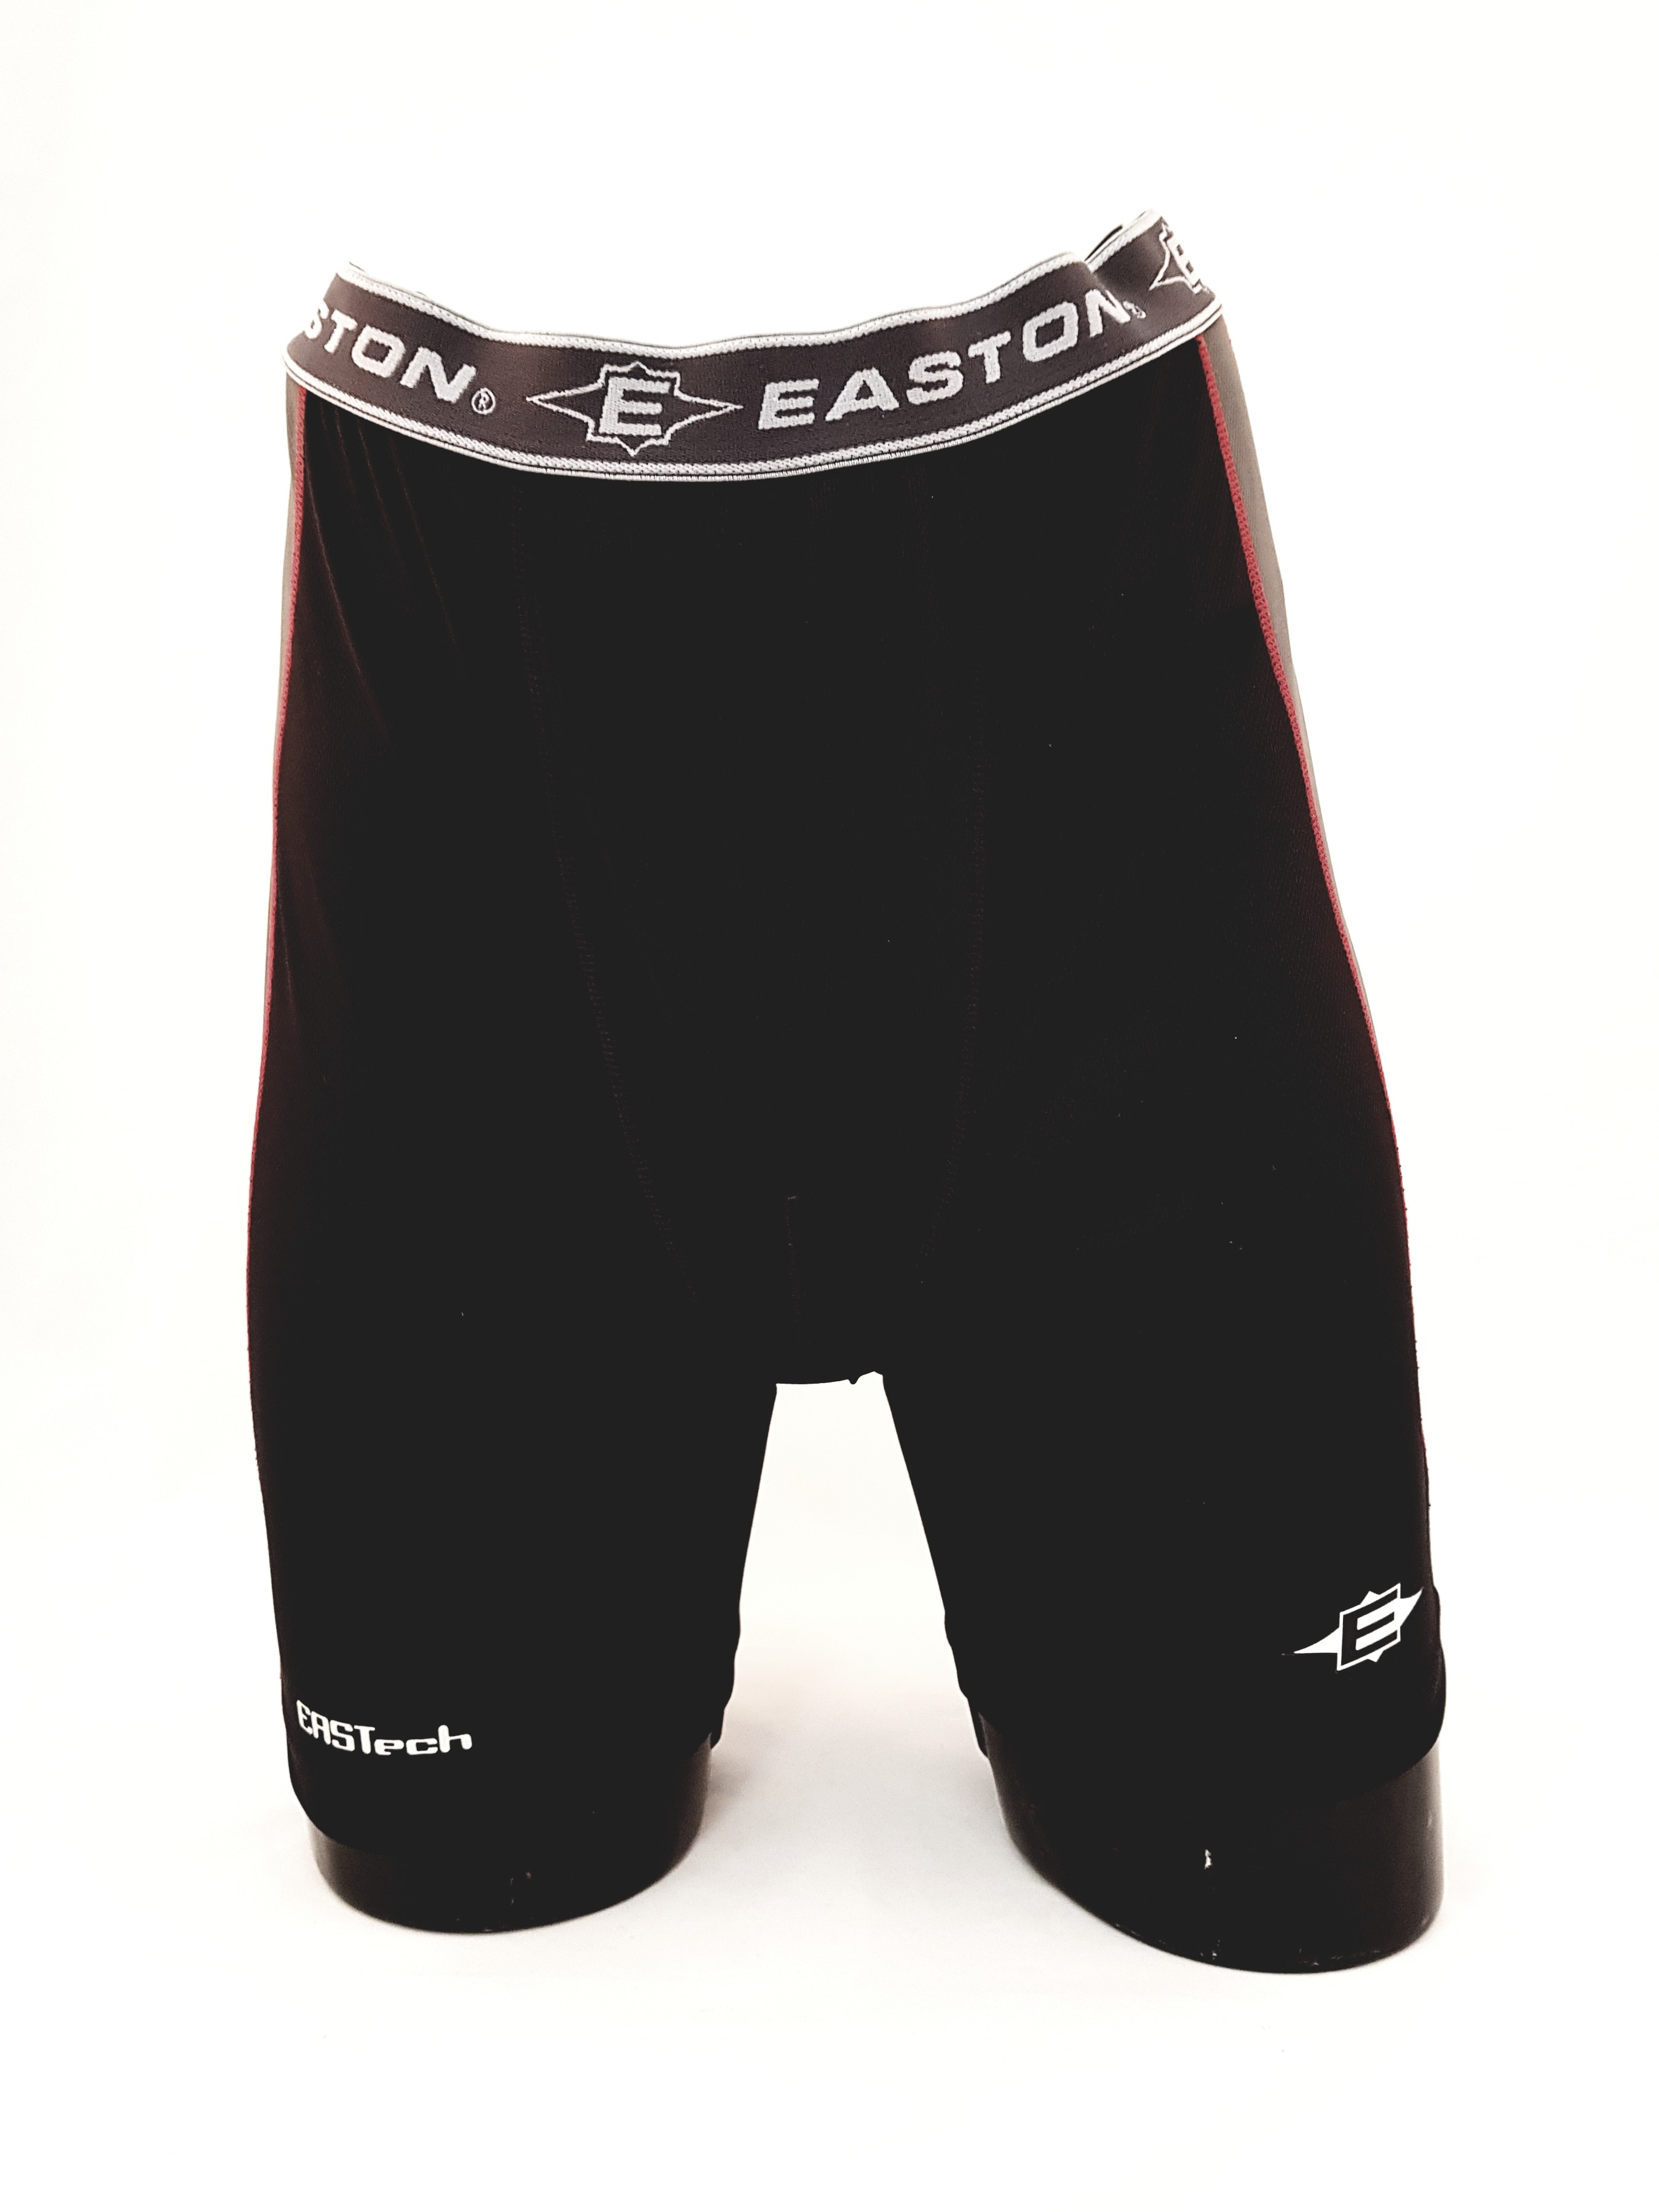 Easton Eastech Adult Compression Shorts